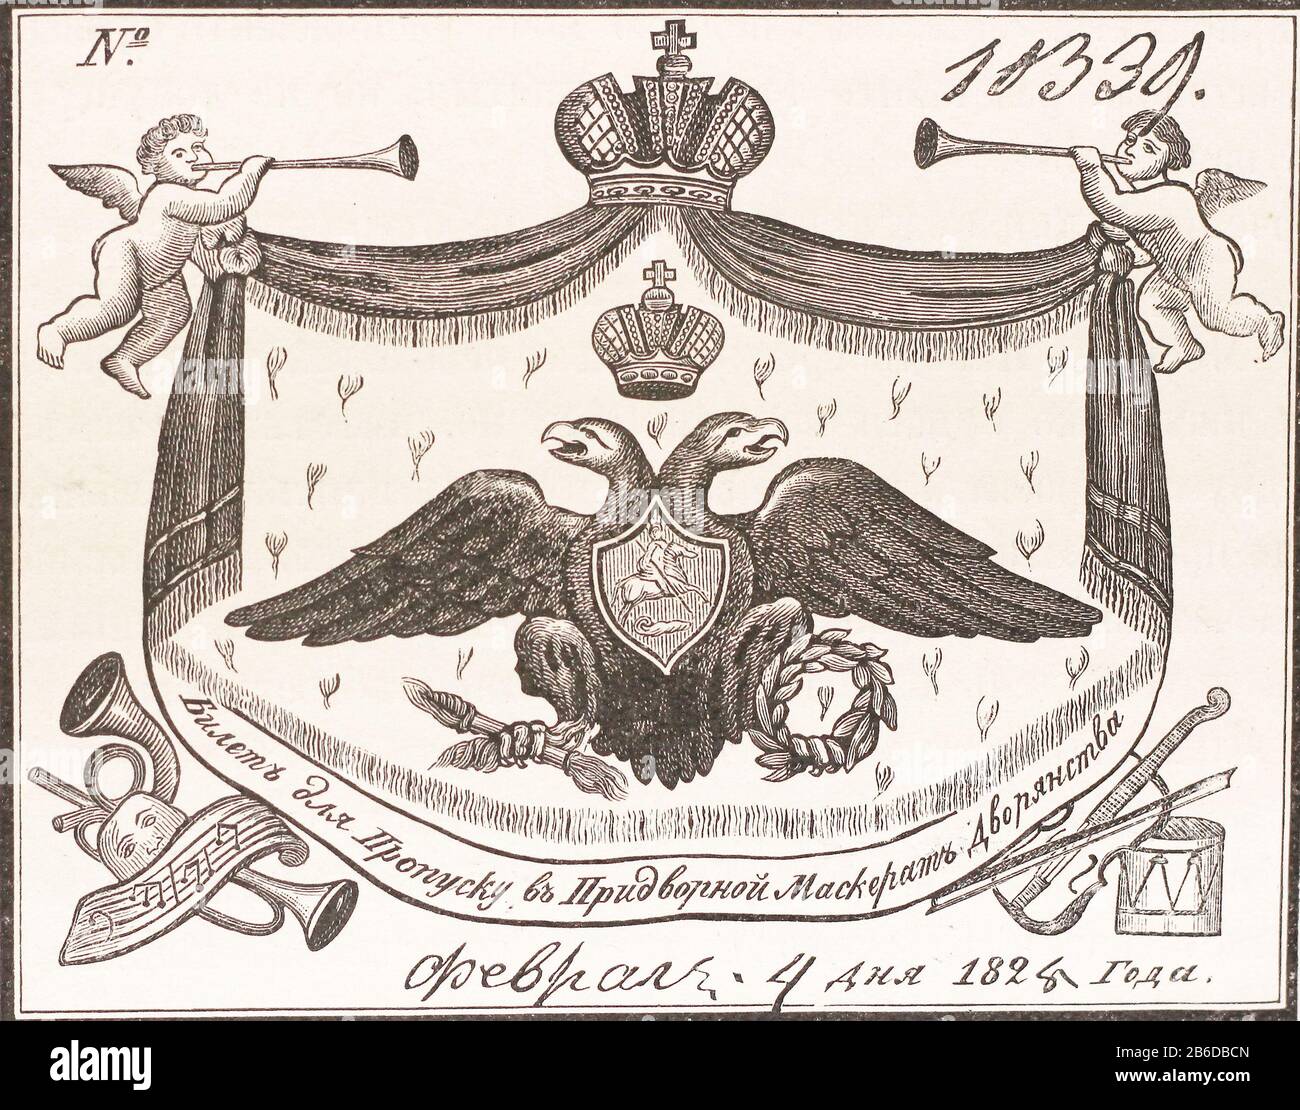 A ticket to enter the court masquerade of the nobility in 1825 in the Russian Empire. Stock Photo